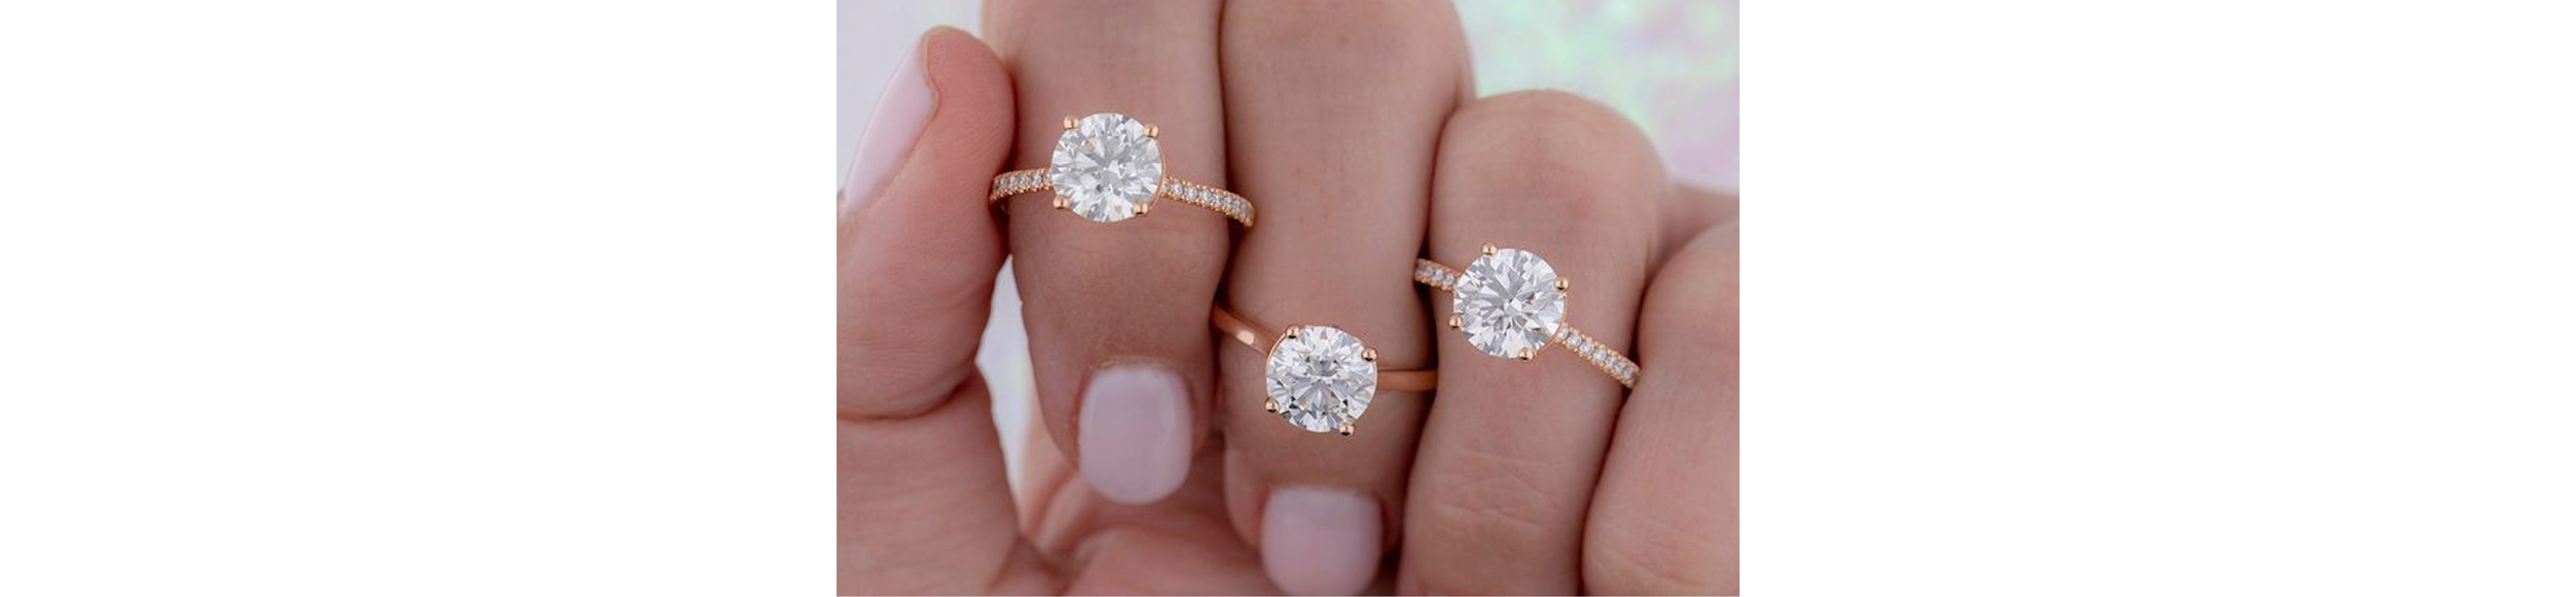 Are Rose Gold Engagement Rings More Expensive?